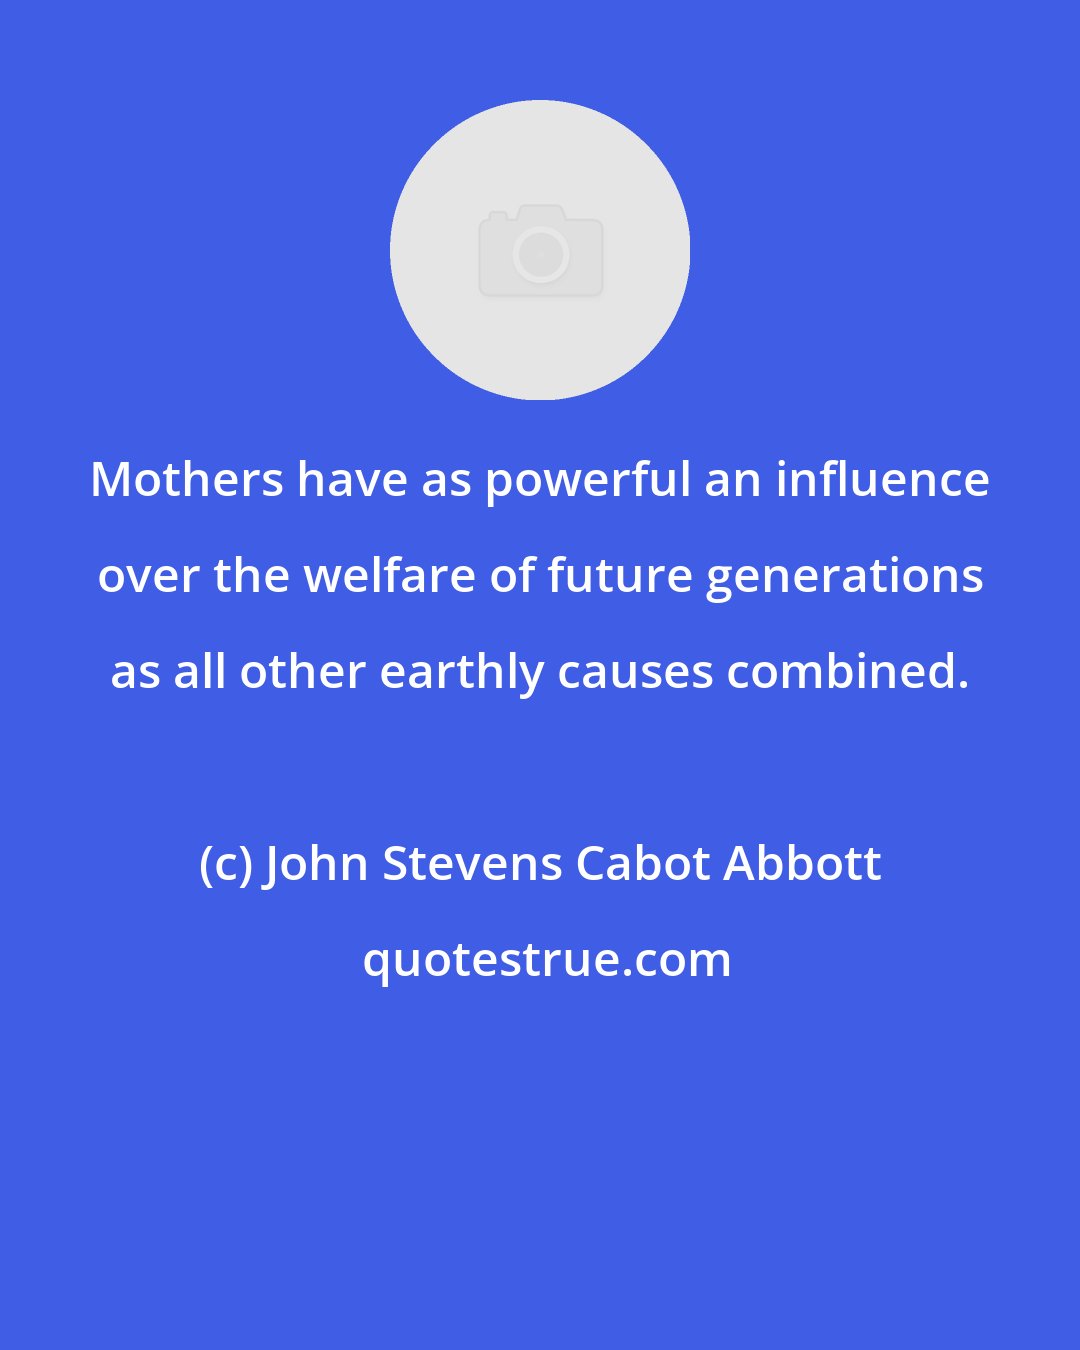 John Stevens Cabot Abbott: Mothers have as powerful an influence over the welfare of future generations as all other earthly causes combined.